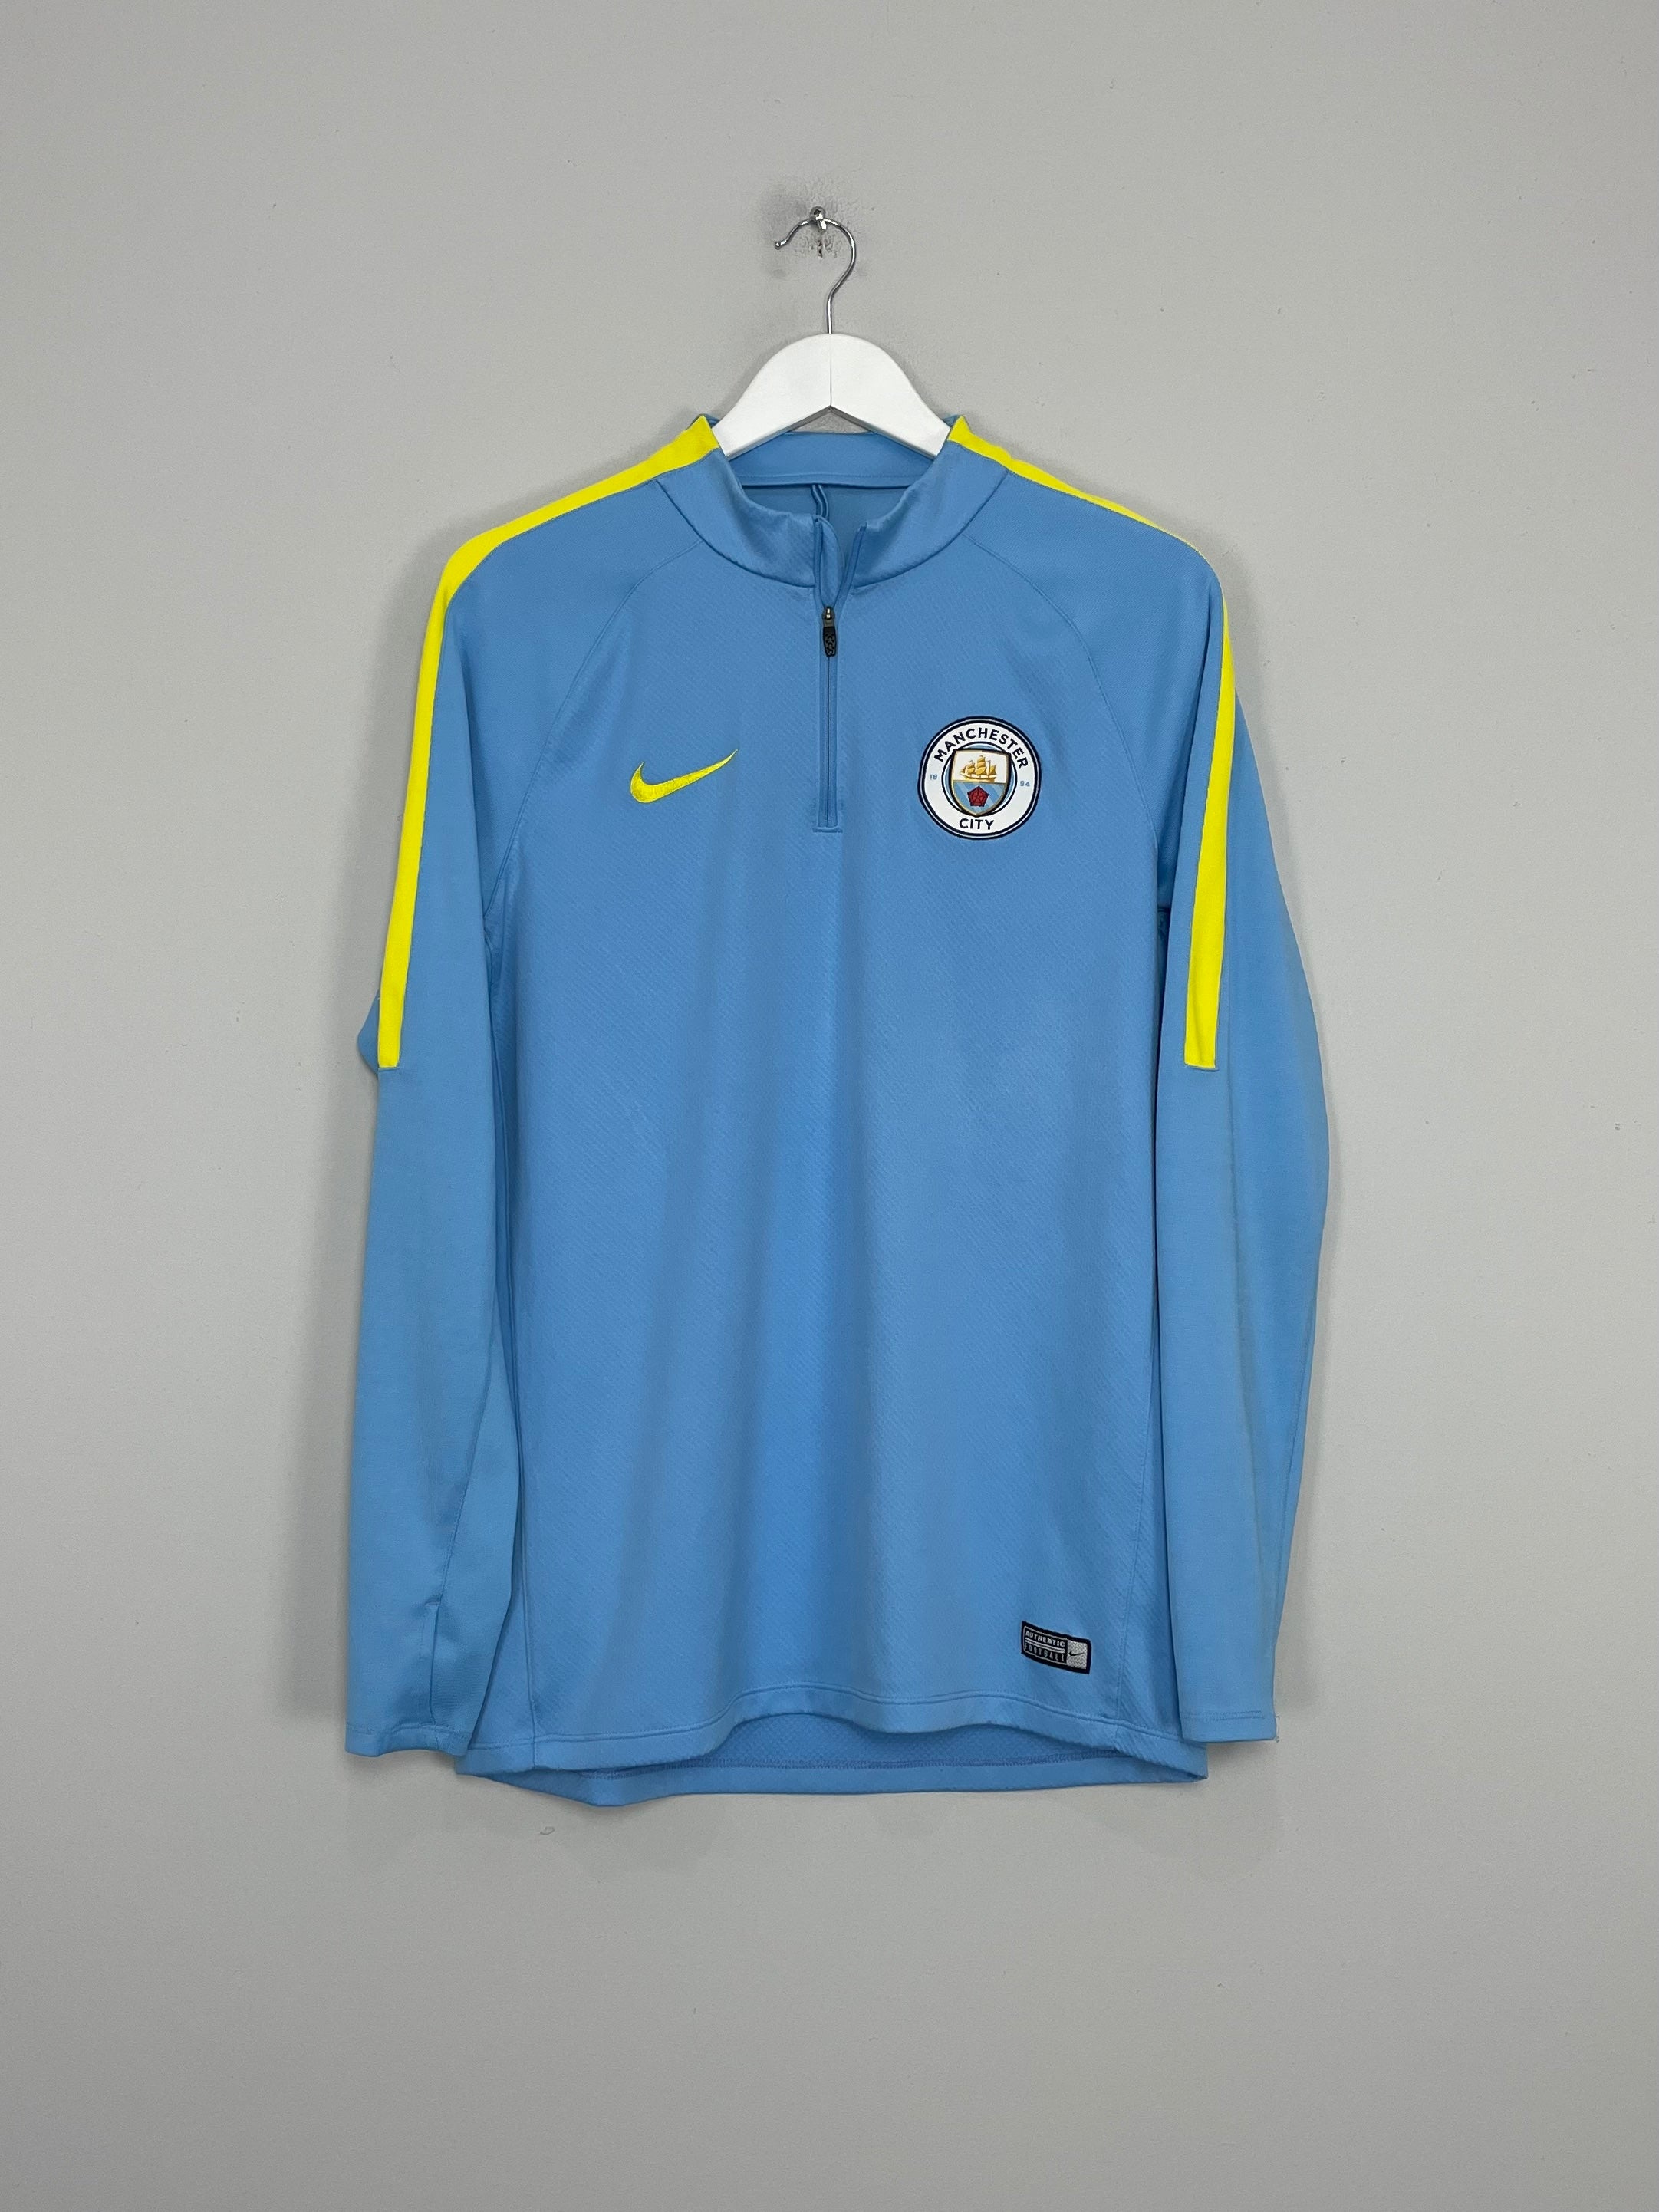 2017/18 MANCHESTER CITY 1/4 ZIP TRAINING TOP (L) NIKE